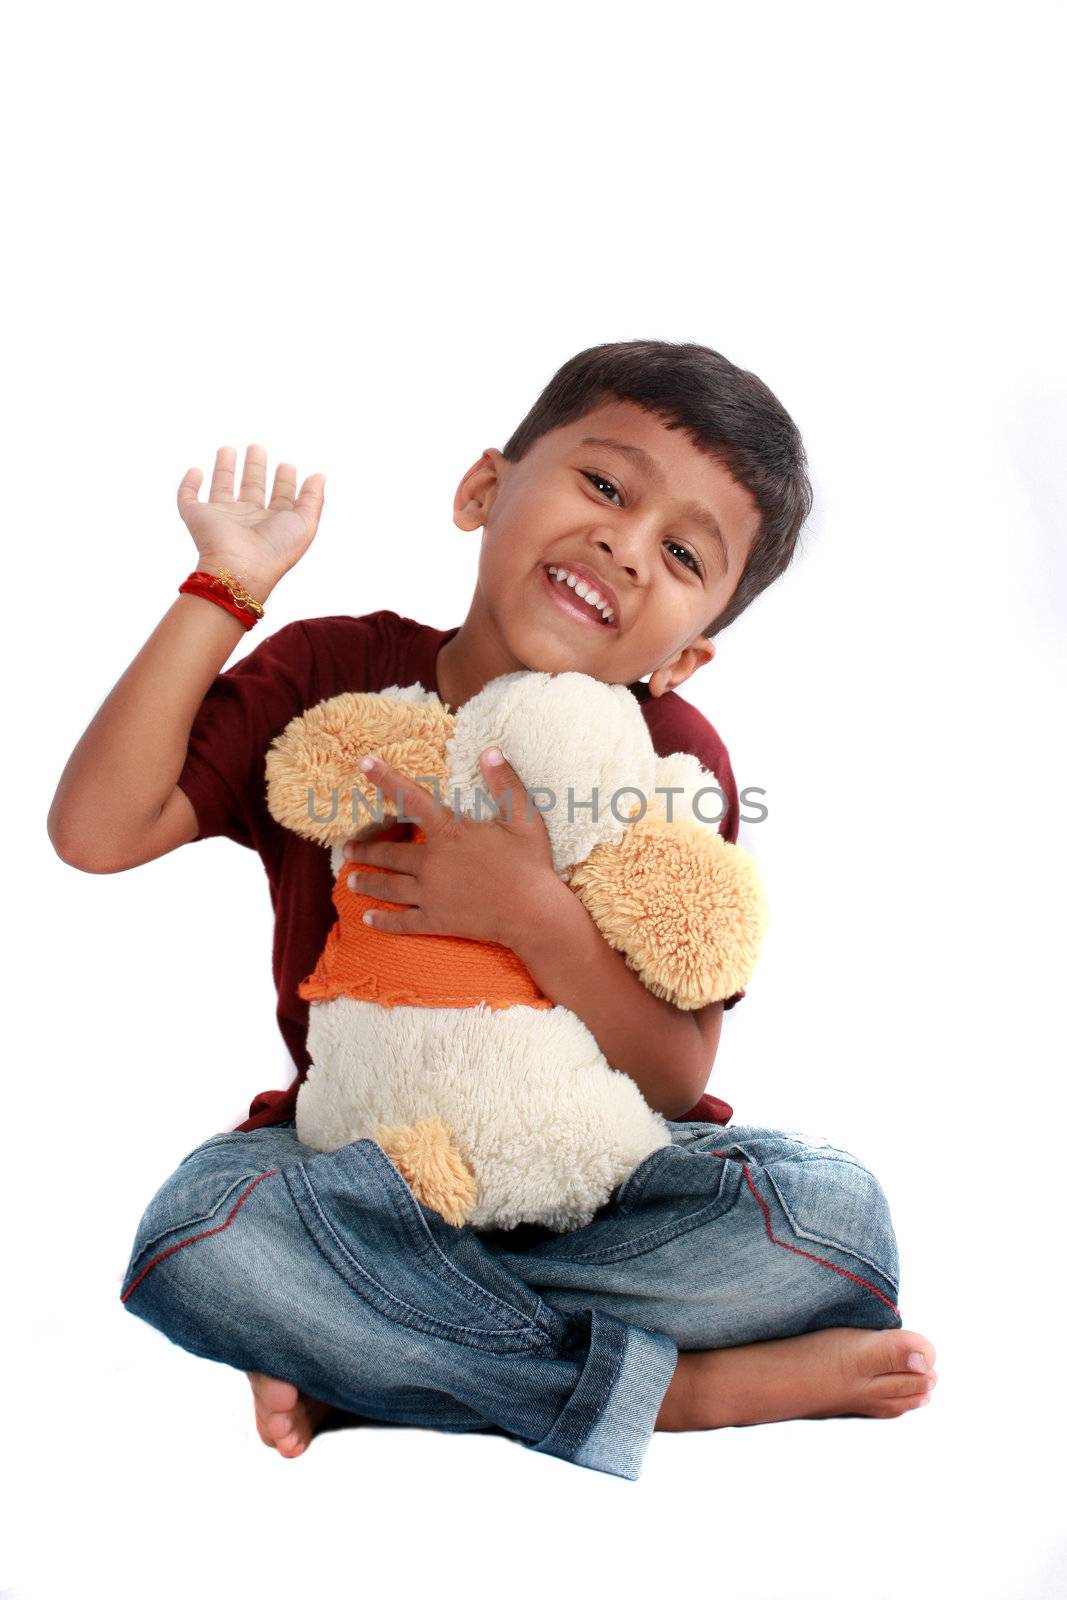 A cute Indian boy happy with his stuffed toy, on white studio background.